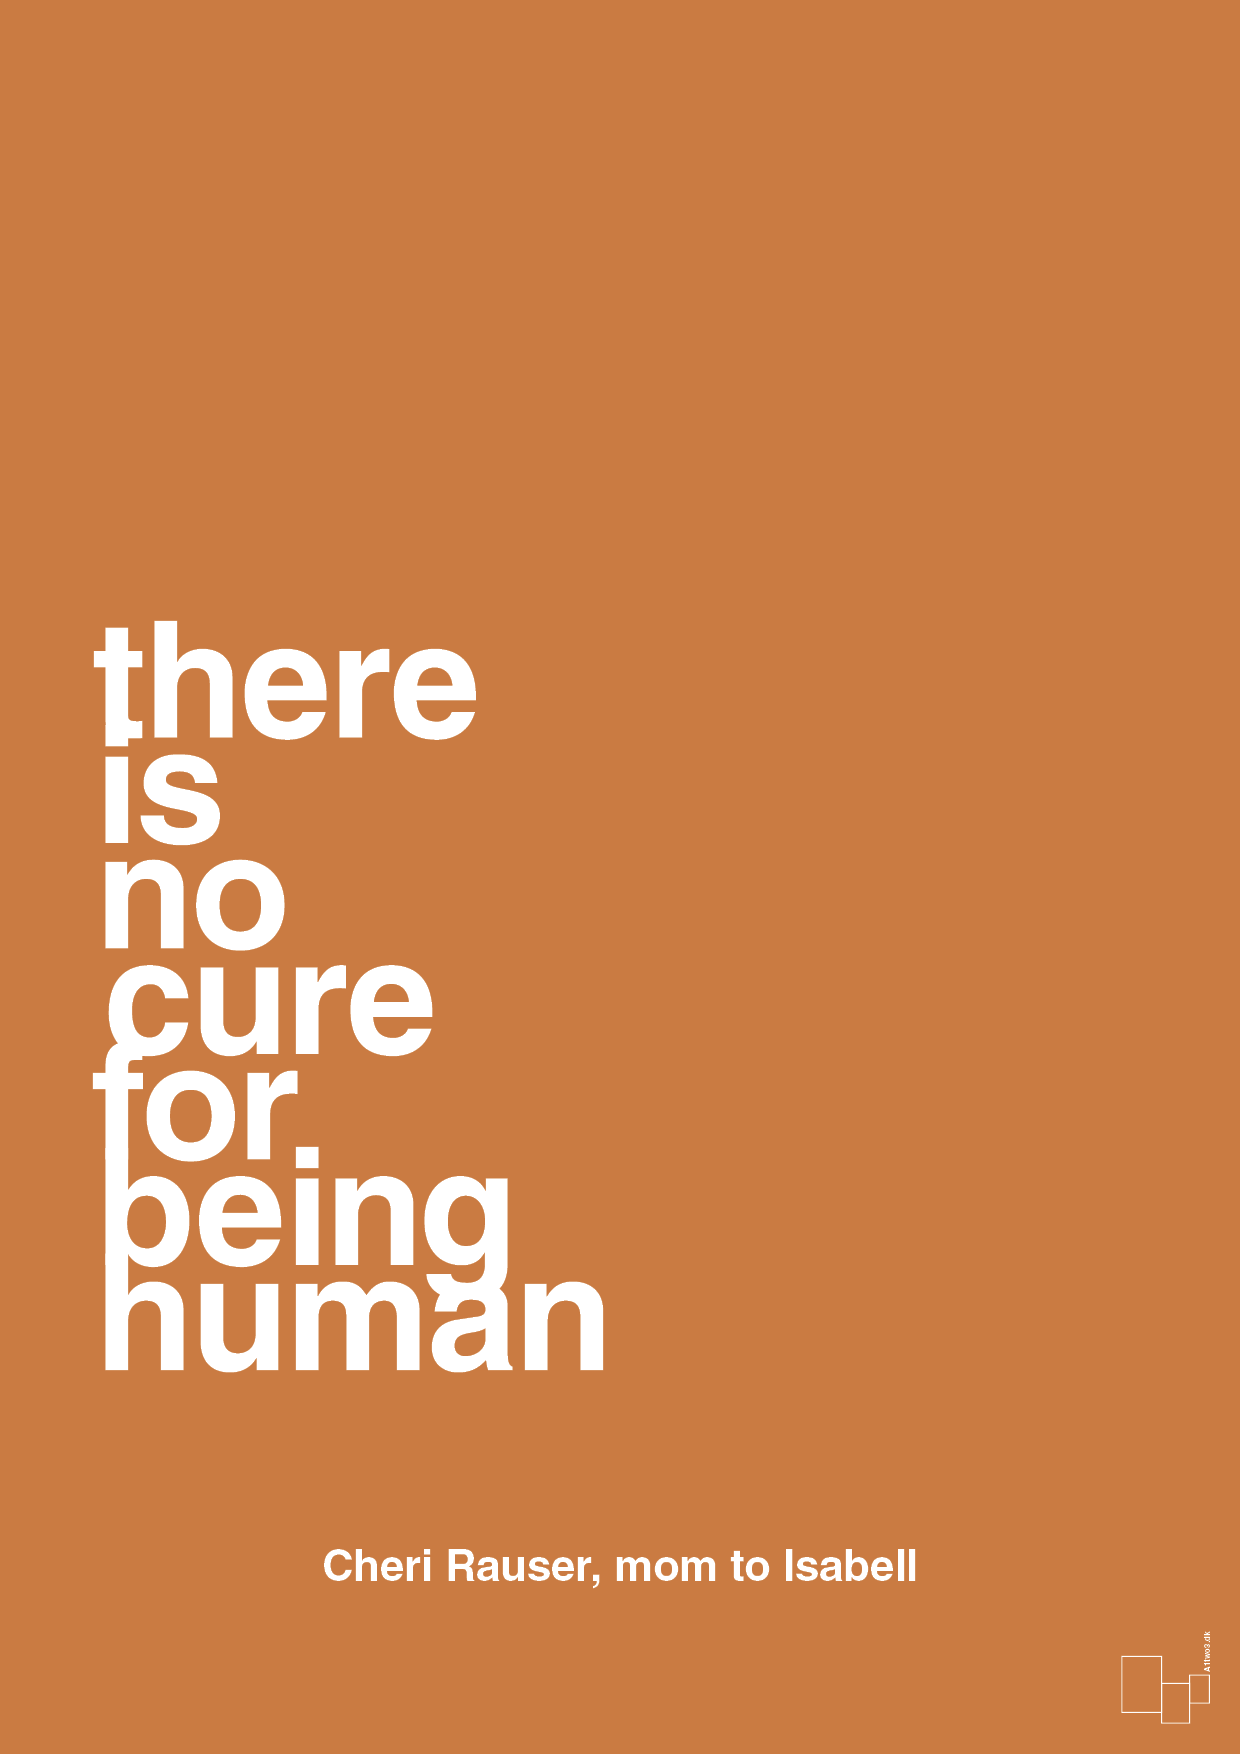 there is no cure for being human - Plakat med Samfund i Rumba Orange